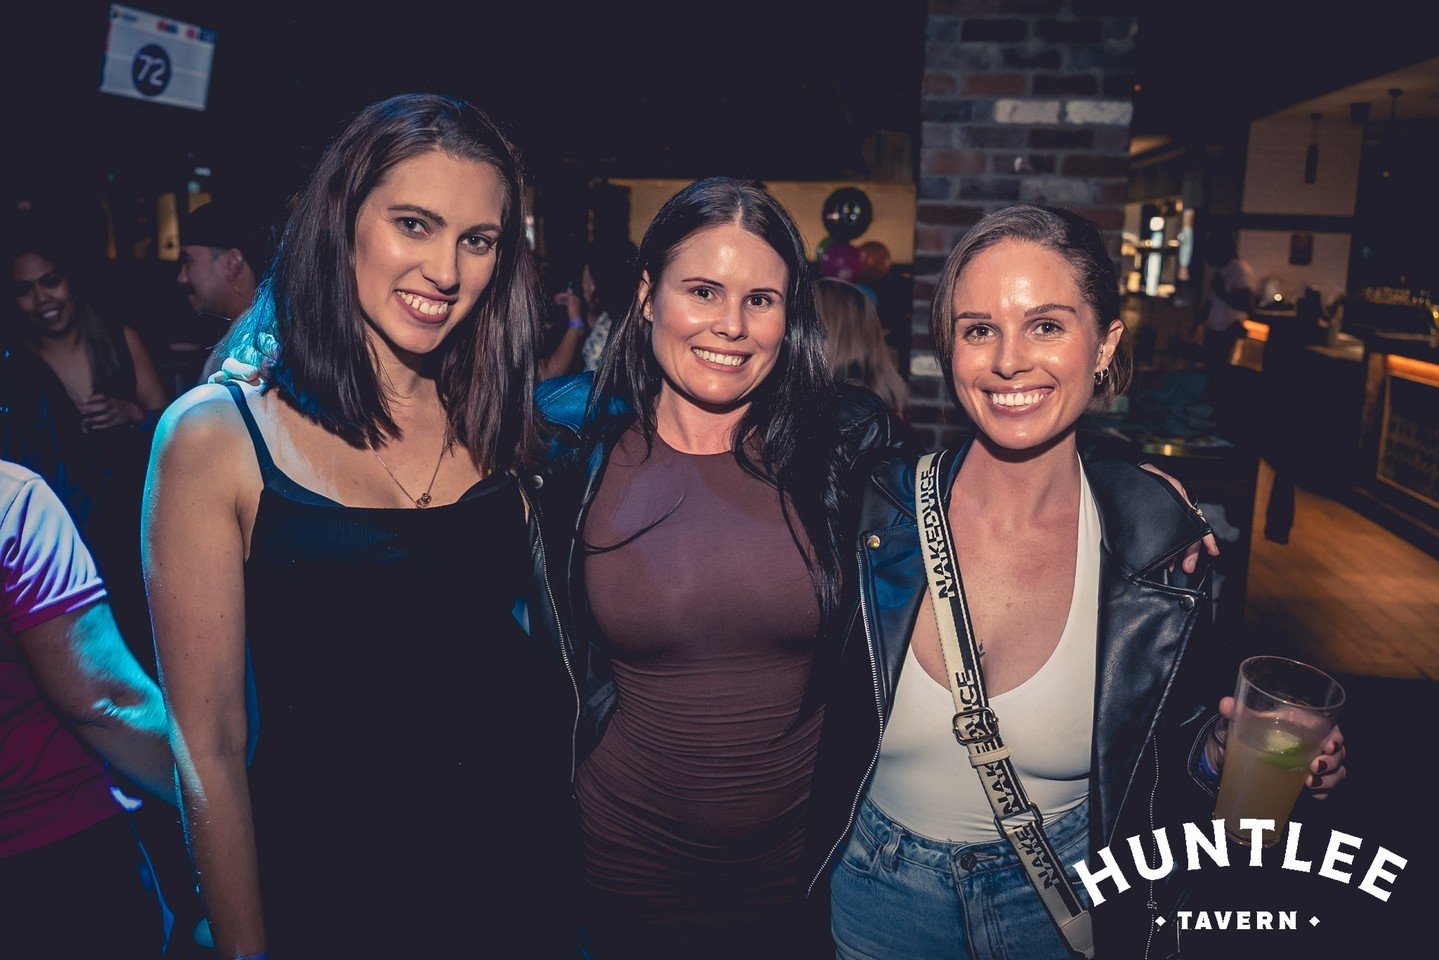 🚌🎉 Join us Fridays at the Tav for DJ beats and $6 spirits from 9pm! Free entry! Catch the party bus from Cessnock, Maitland, Rutherford, and Singleton! Reserve now: [tinyurl.com/HuntleeFridayBuses] Plus get your tickets now for Bread Gang 24th May 